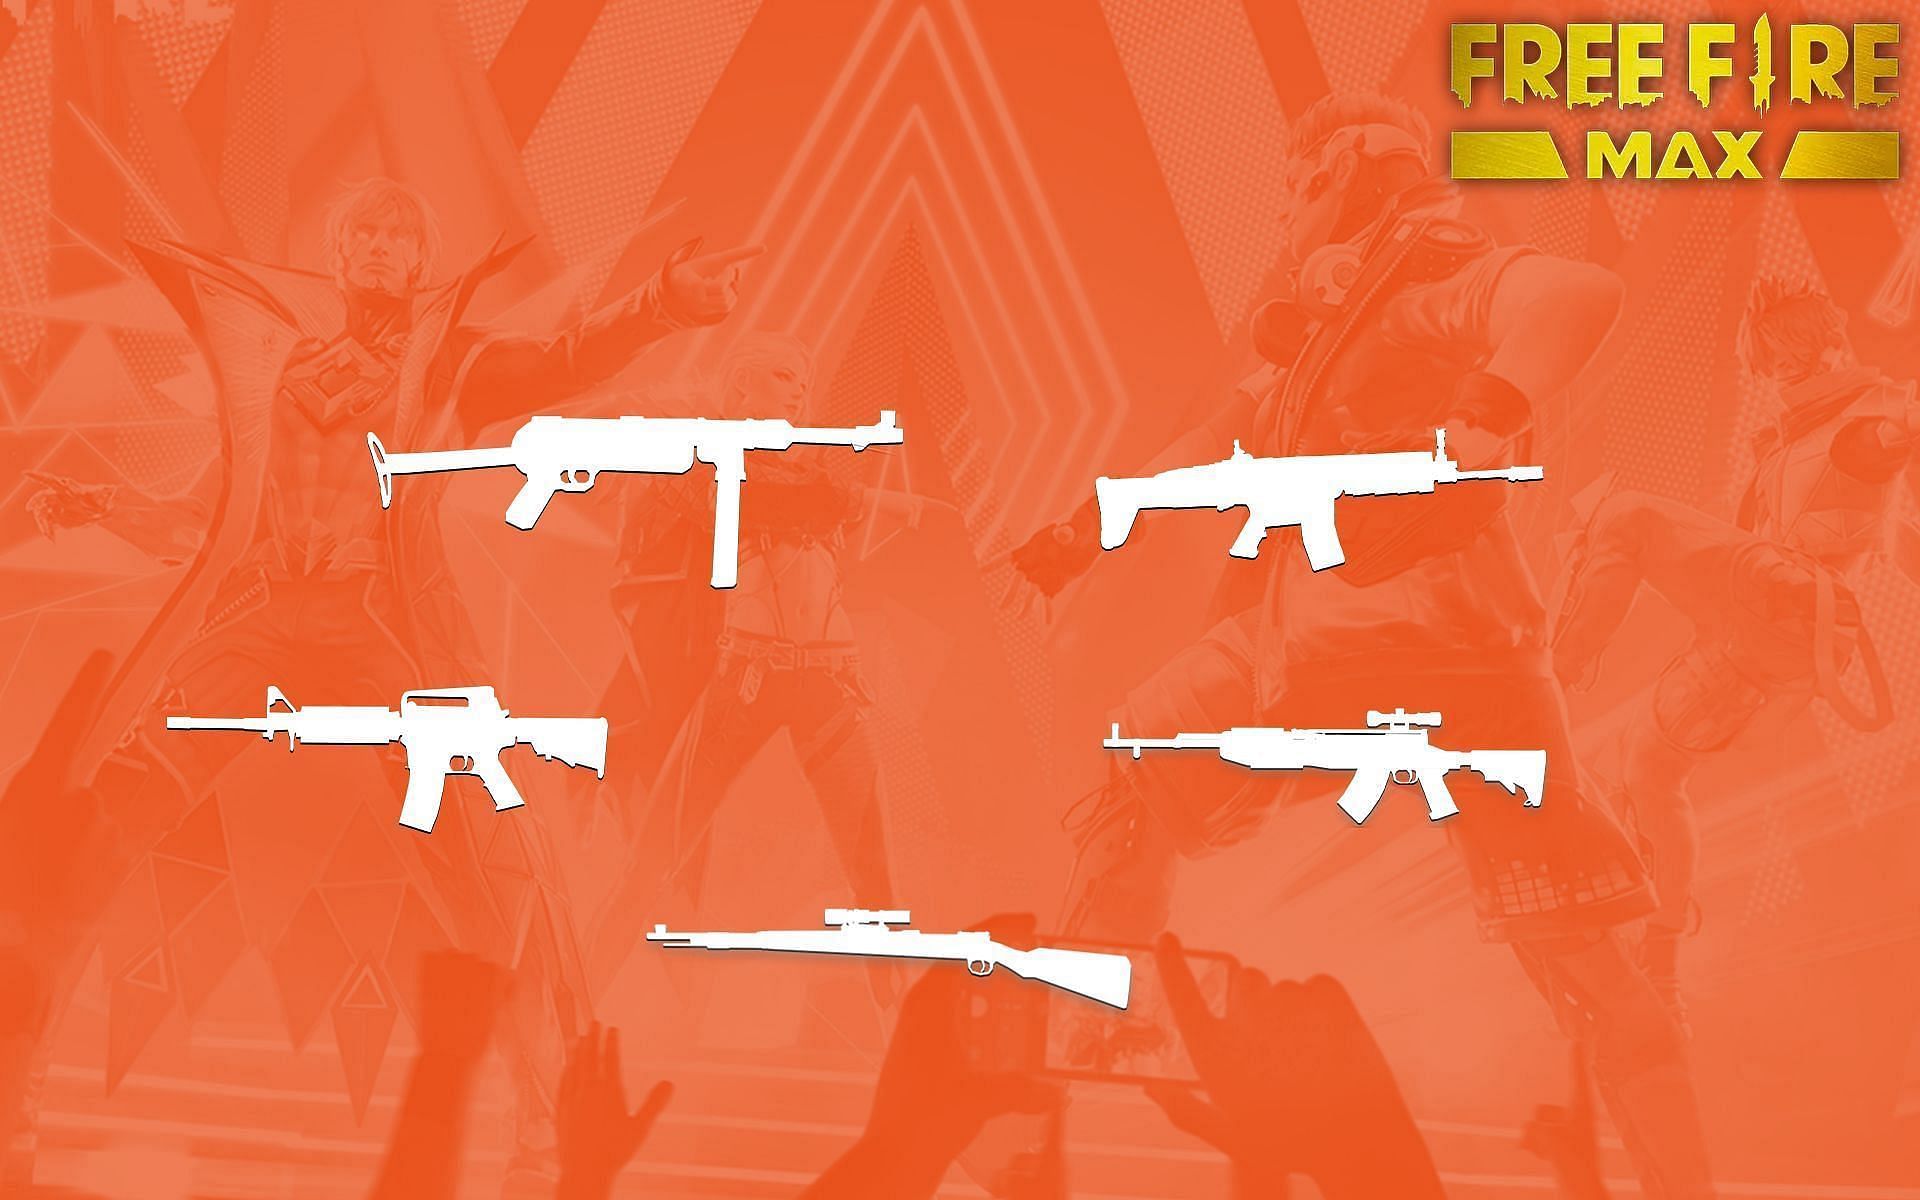 The best gun combinations that one can use in Free Fire MAX (Image via Sportskeeda)